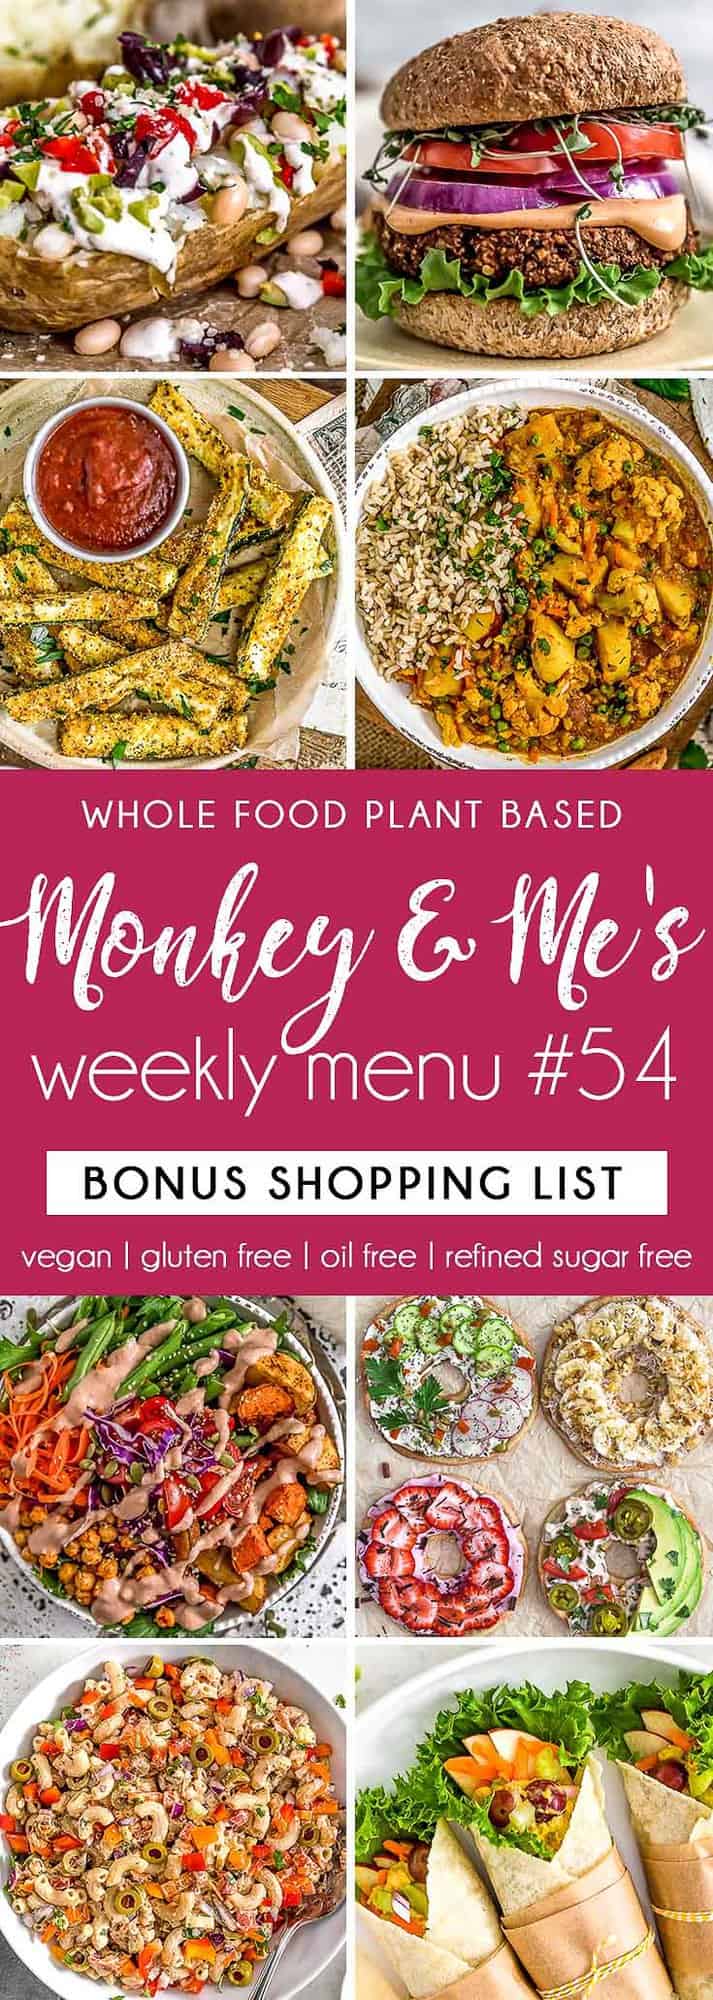 Monkey and Me's Menu 54 featuring 8 recipes